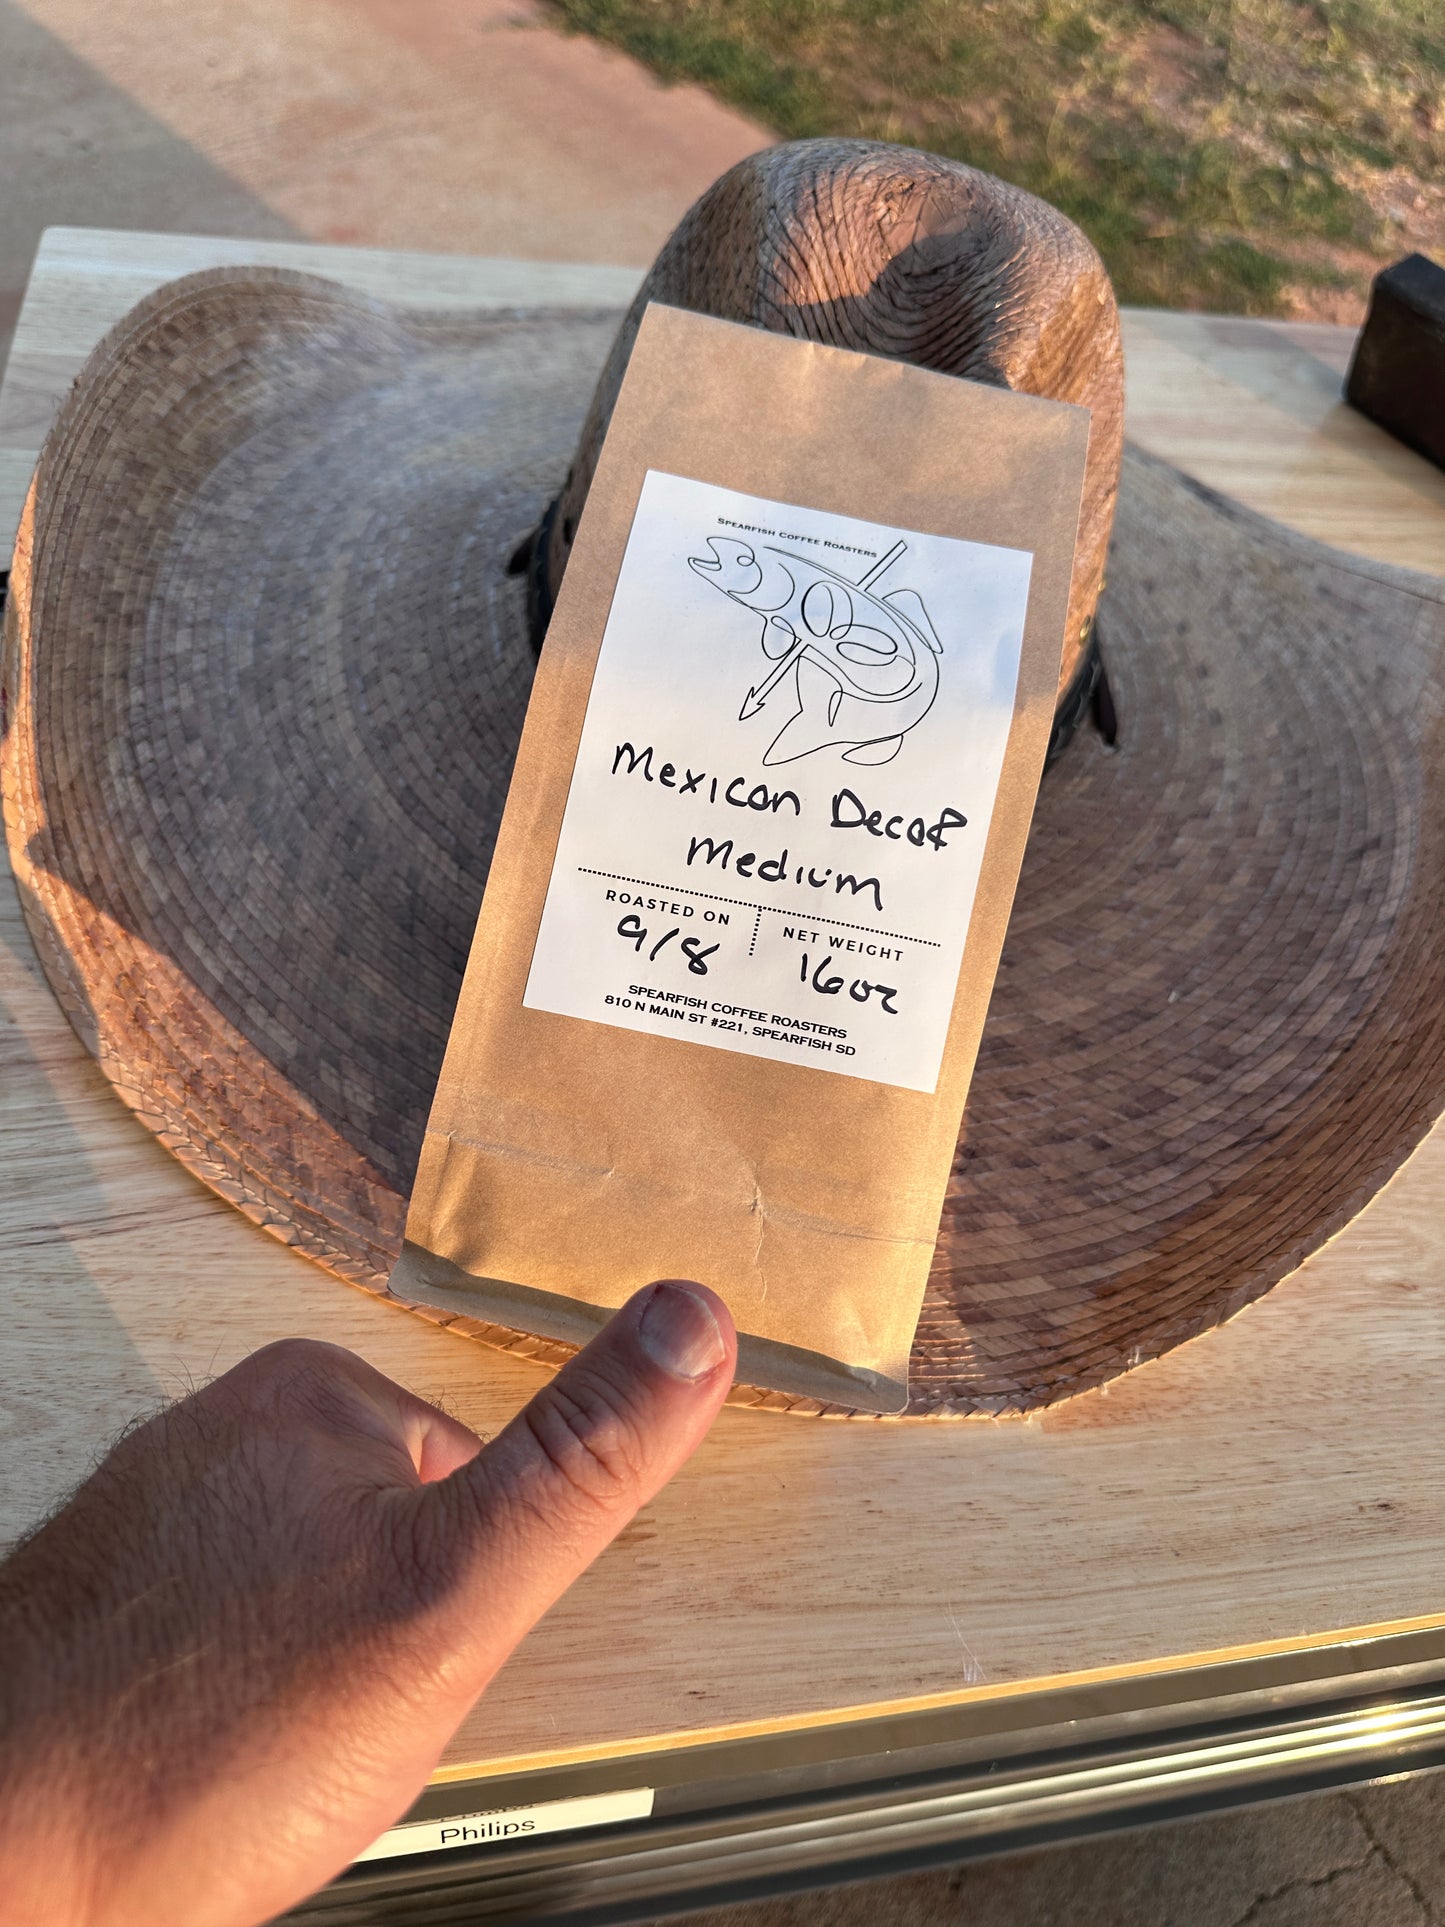 Mexican Decaf